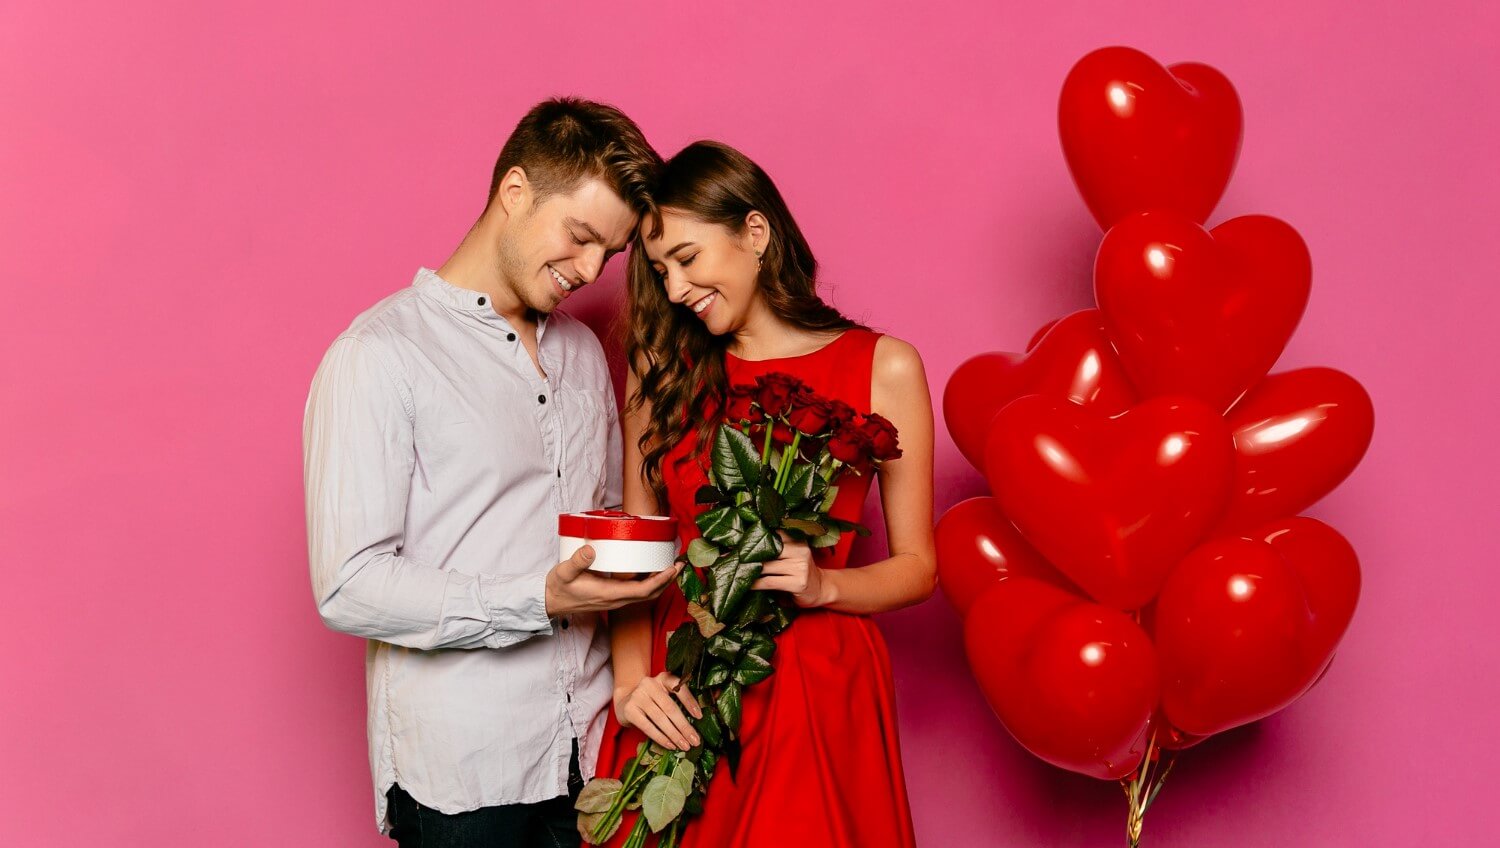 Top Valentine’s Day gift ideas for 2022: Special ways to surprise him and her